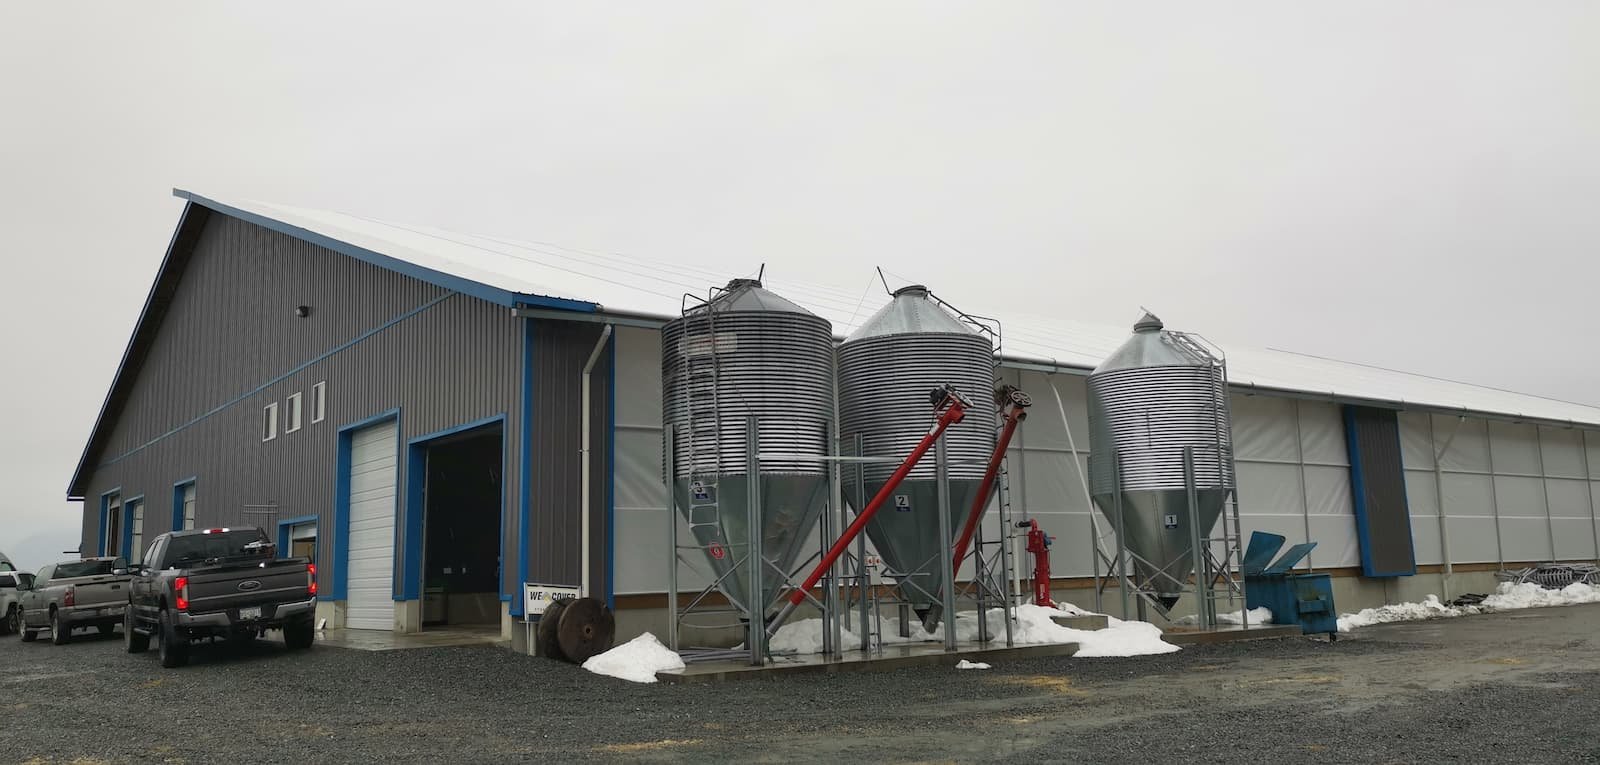  A 146’ x 207’ Fabric Roof Dairy Barn in Pitt Meadows, British Columbia. 